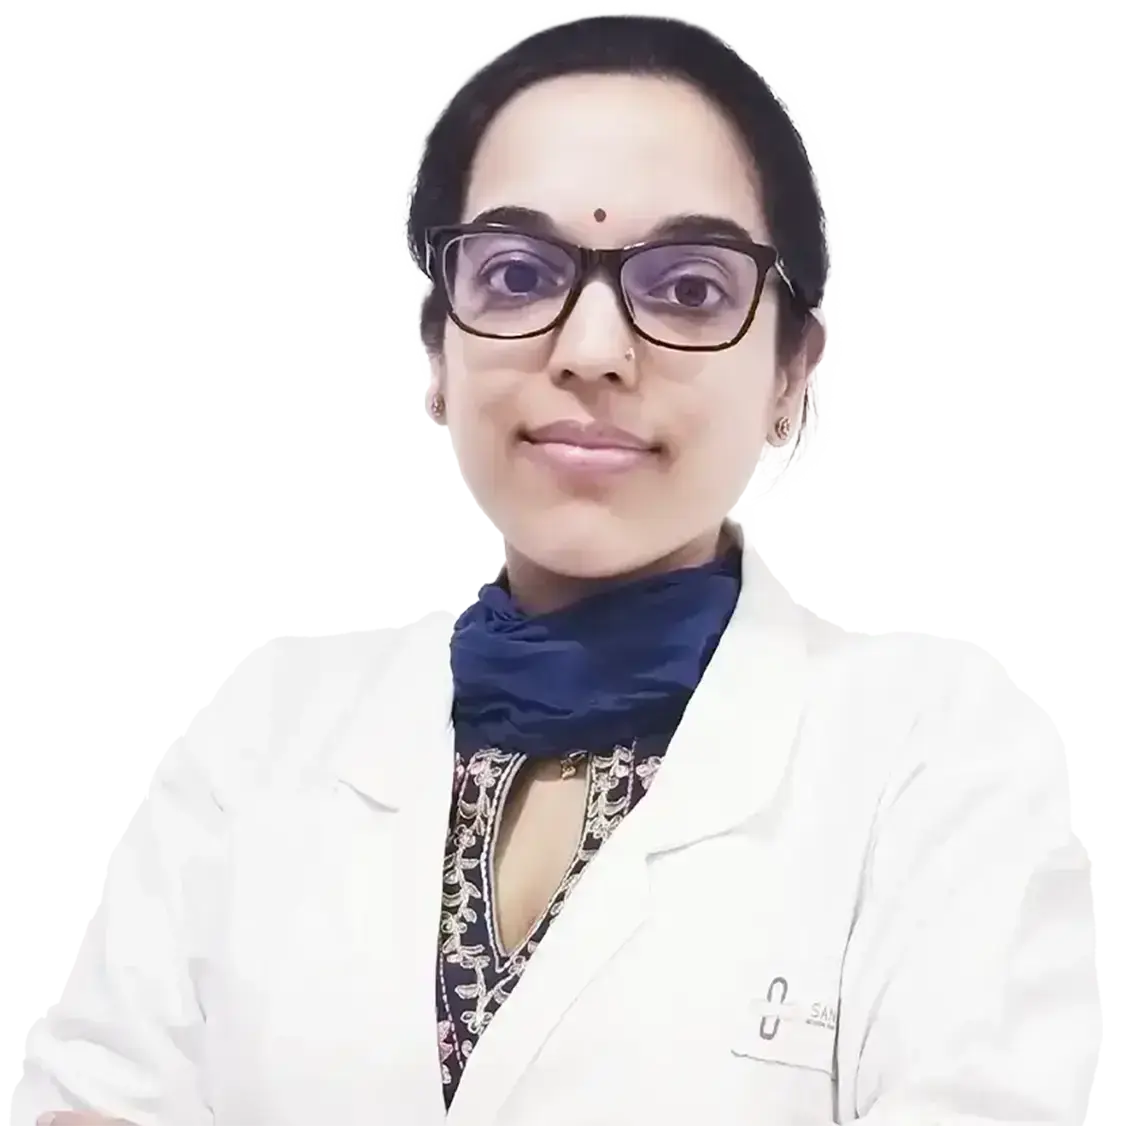 SONALI SHARMA MD - GYNAE & OBS SENIOR CONSULTANT DEPARTMENT OF GYNECOLOGY & OBSTETRICS